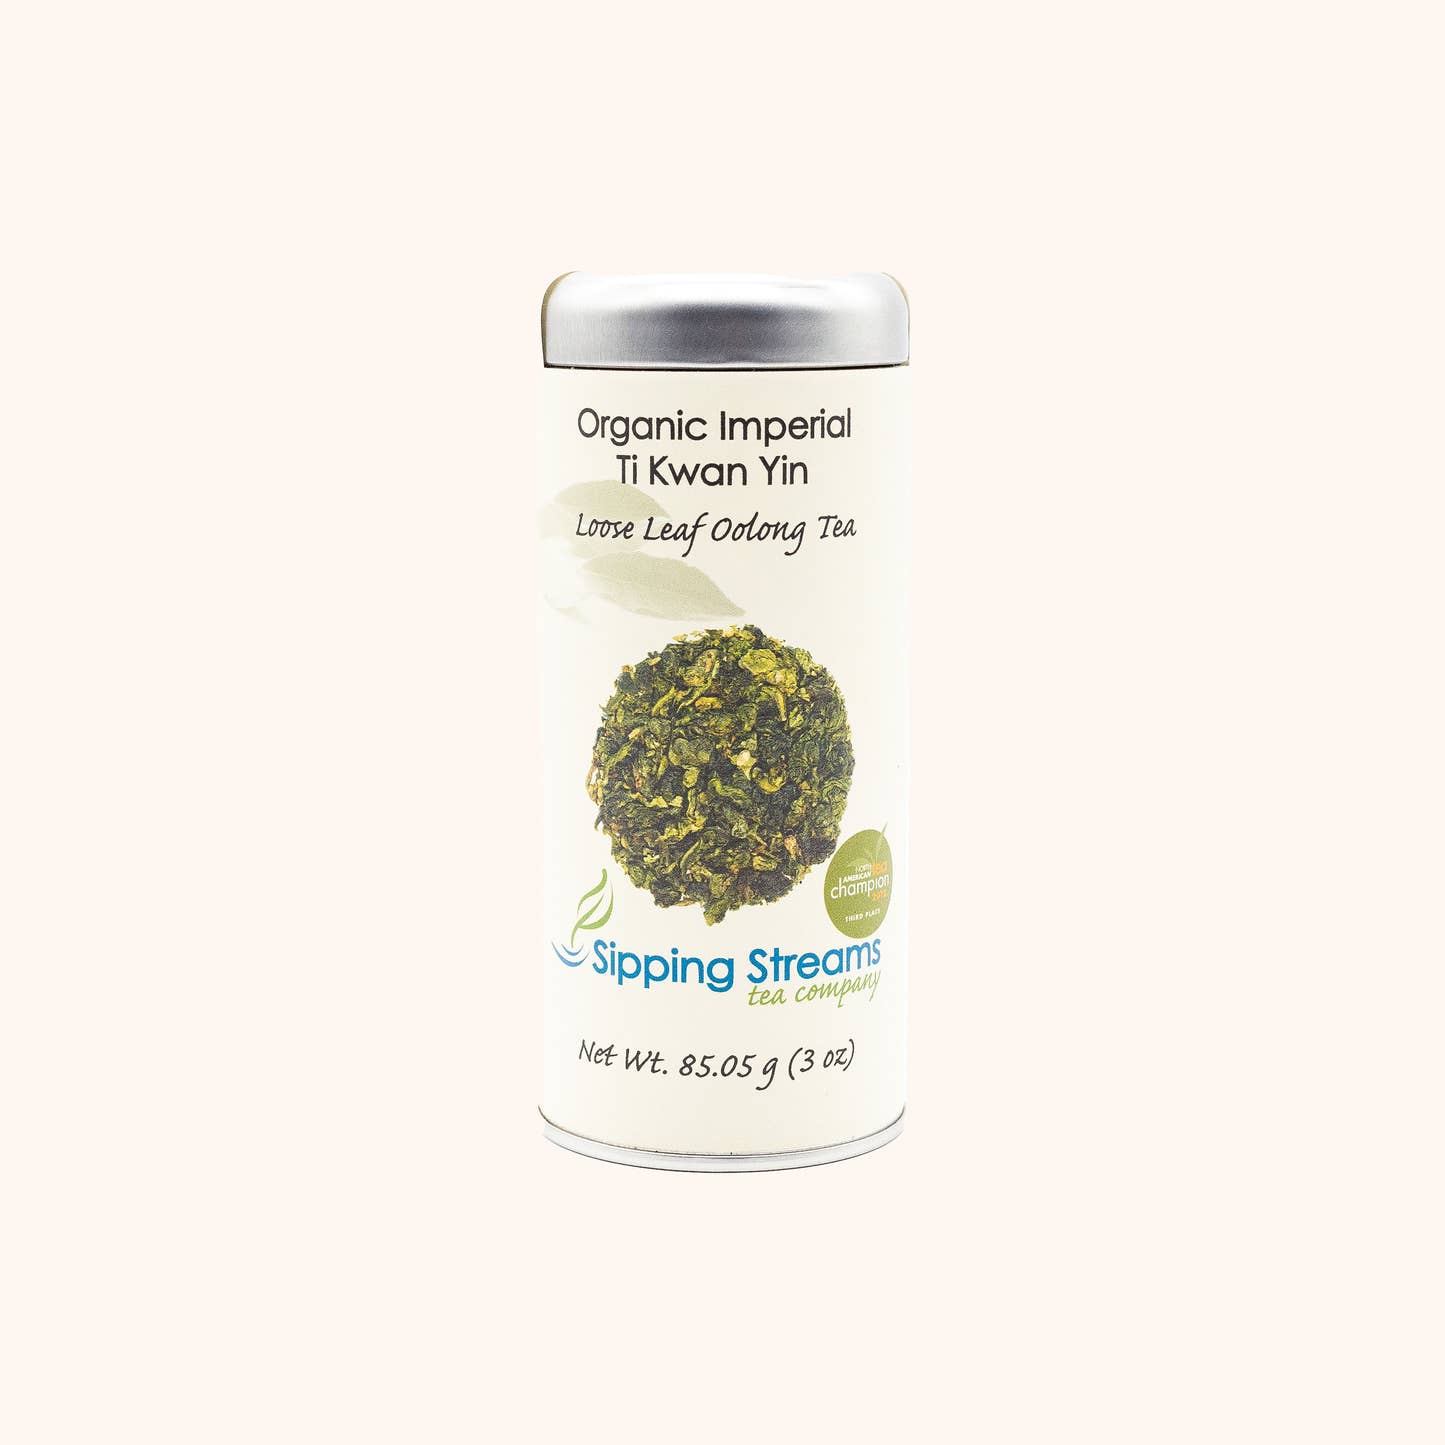 Organic Imperial Ti Kwan Yin by Sipping Streams Tea Company loose leaf oolong tea tin front